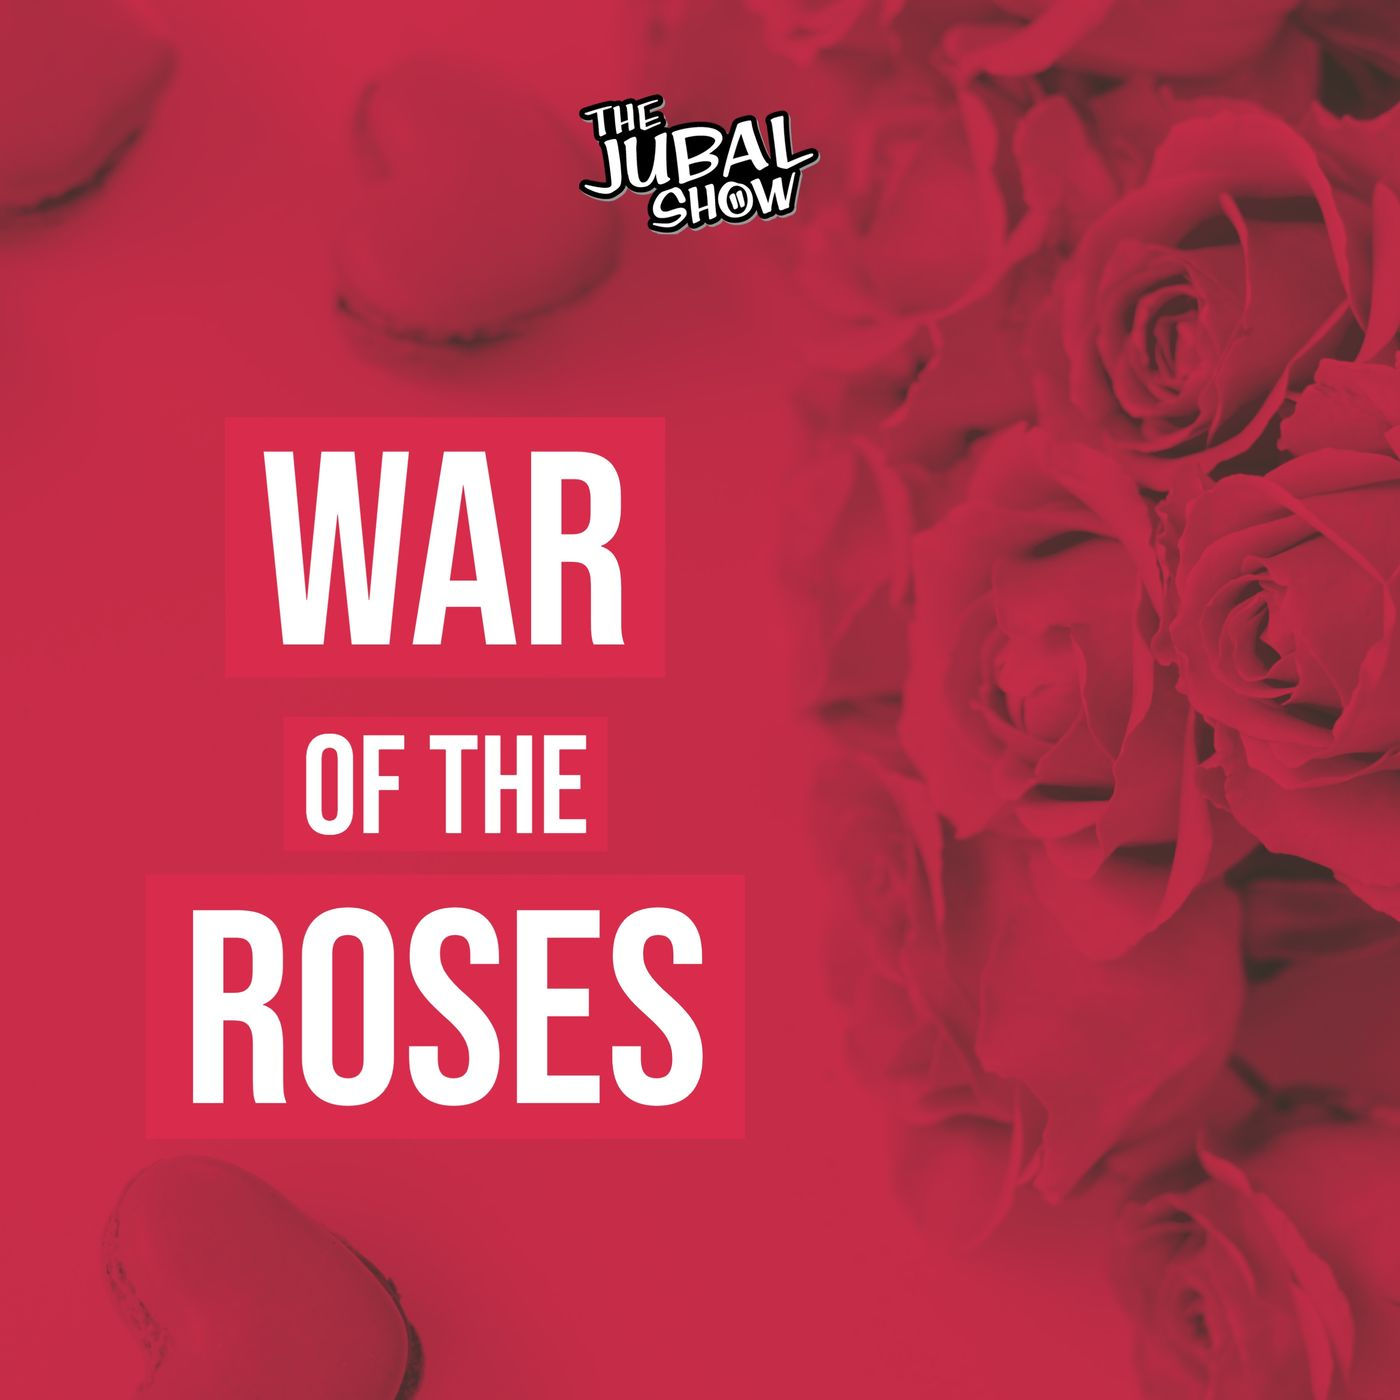 This War of the Roses will be music to your ears!